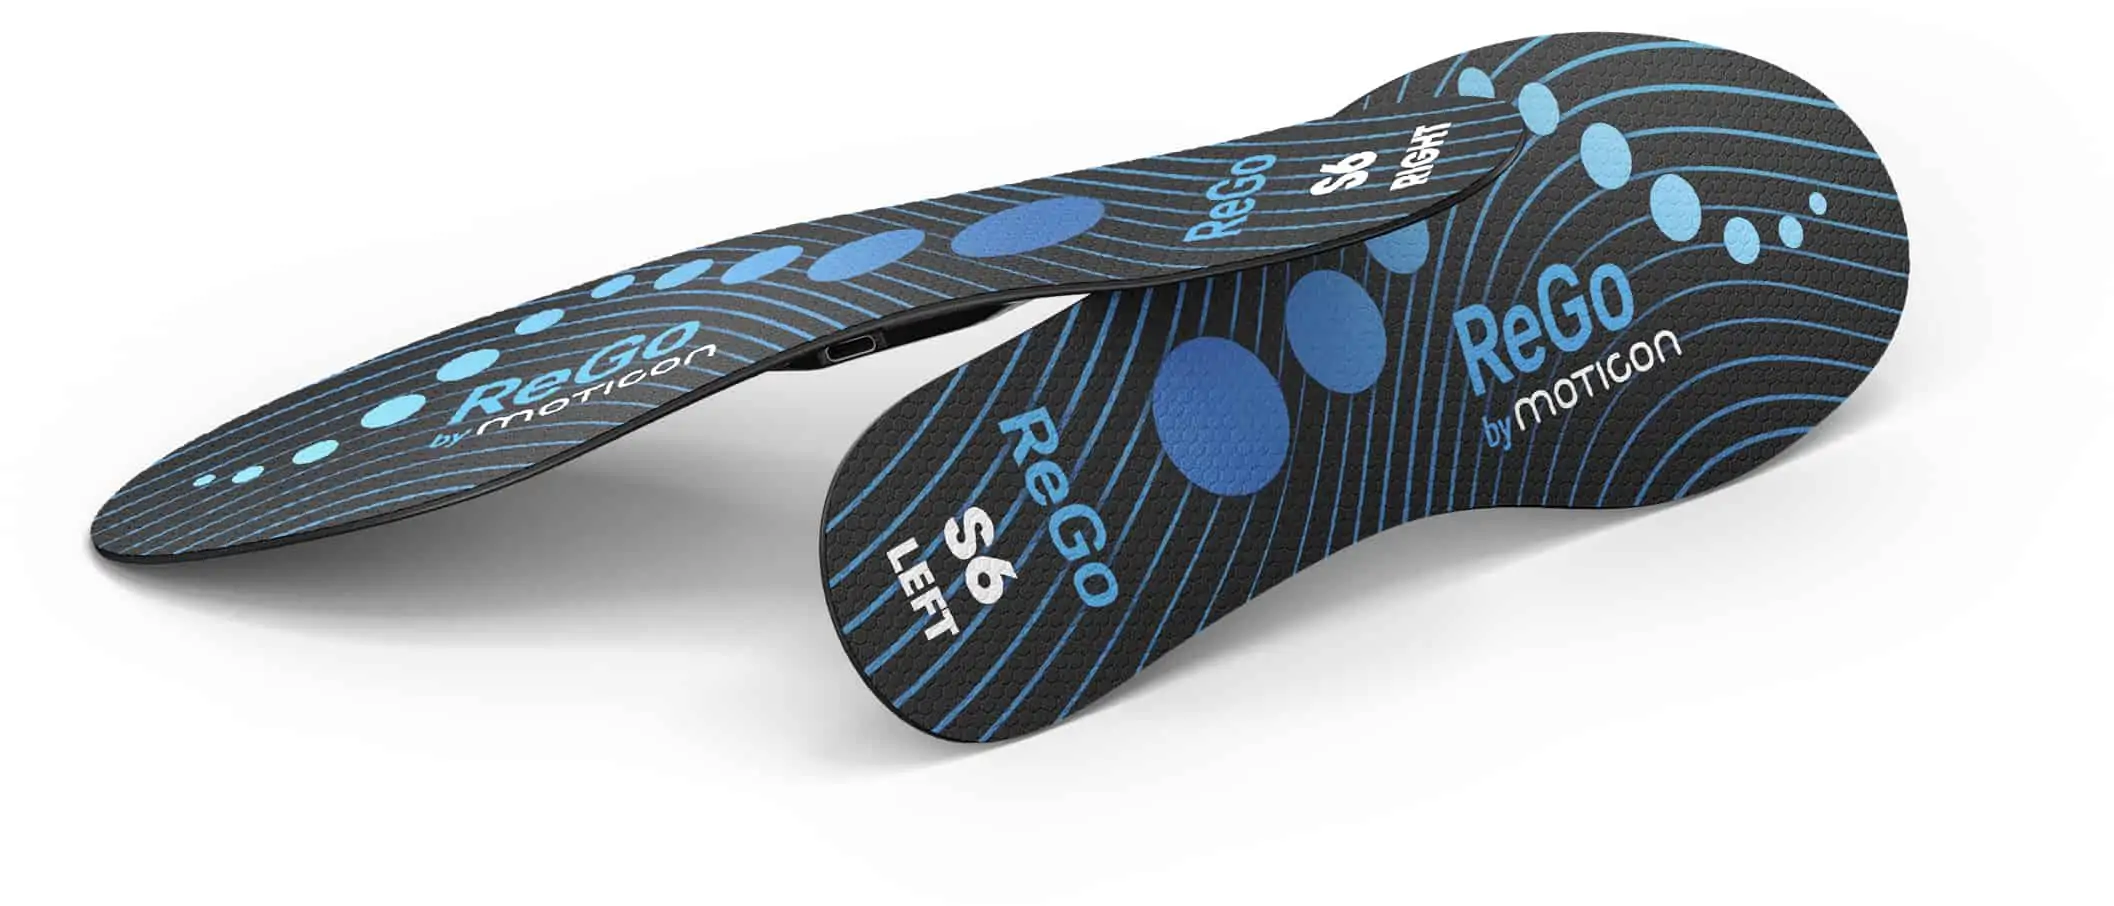 moticon-rego-sensor-insoles-lying-ontop-of-each-other